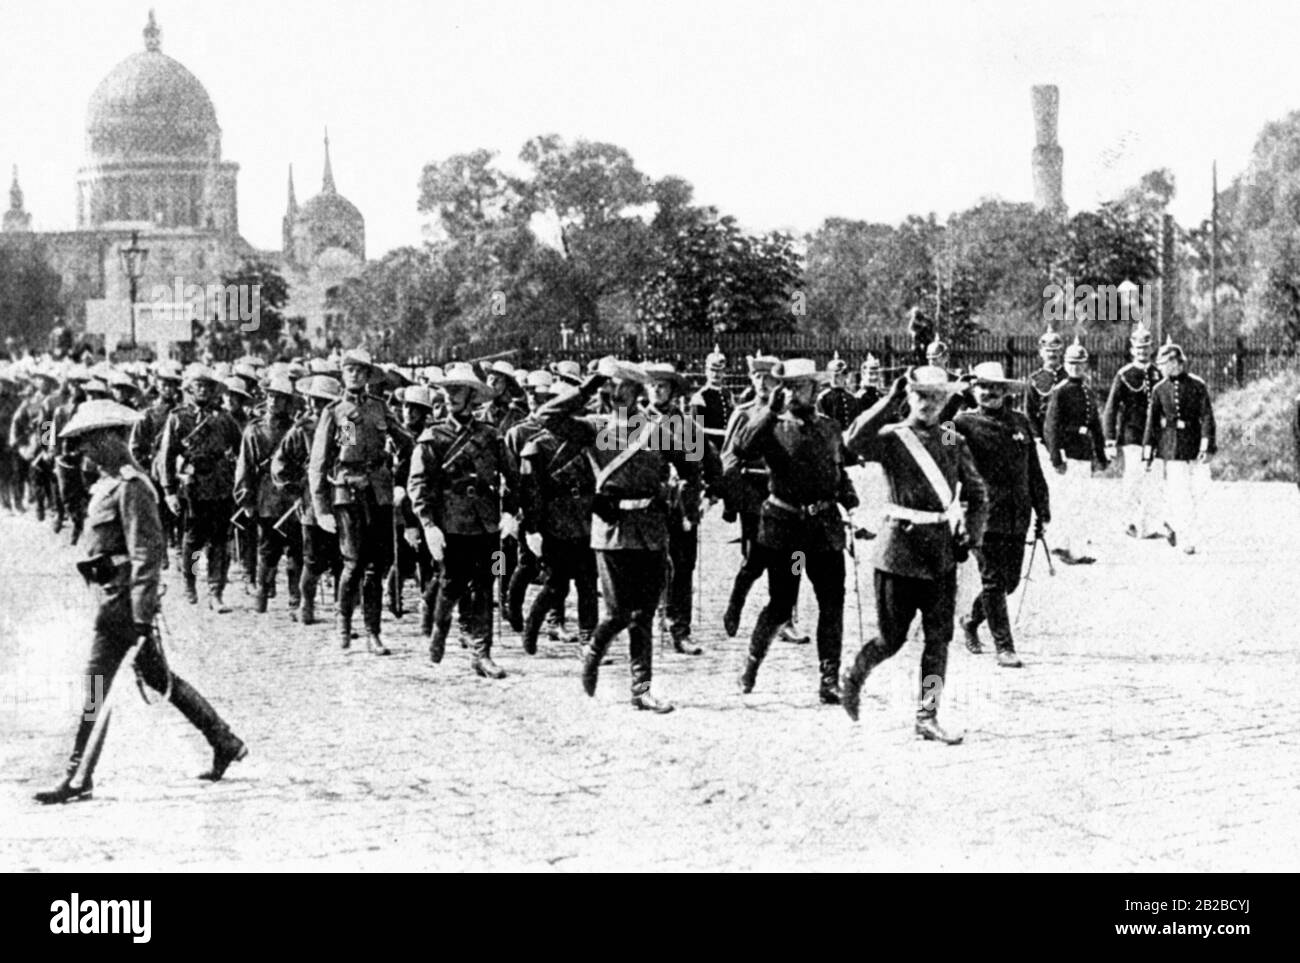 The troops of the cavalry regiment of the East Asian expeditionary corps march through the streets of Potsdam in their new special uniforms. Stock Photo